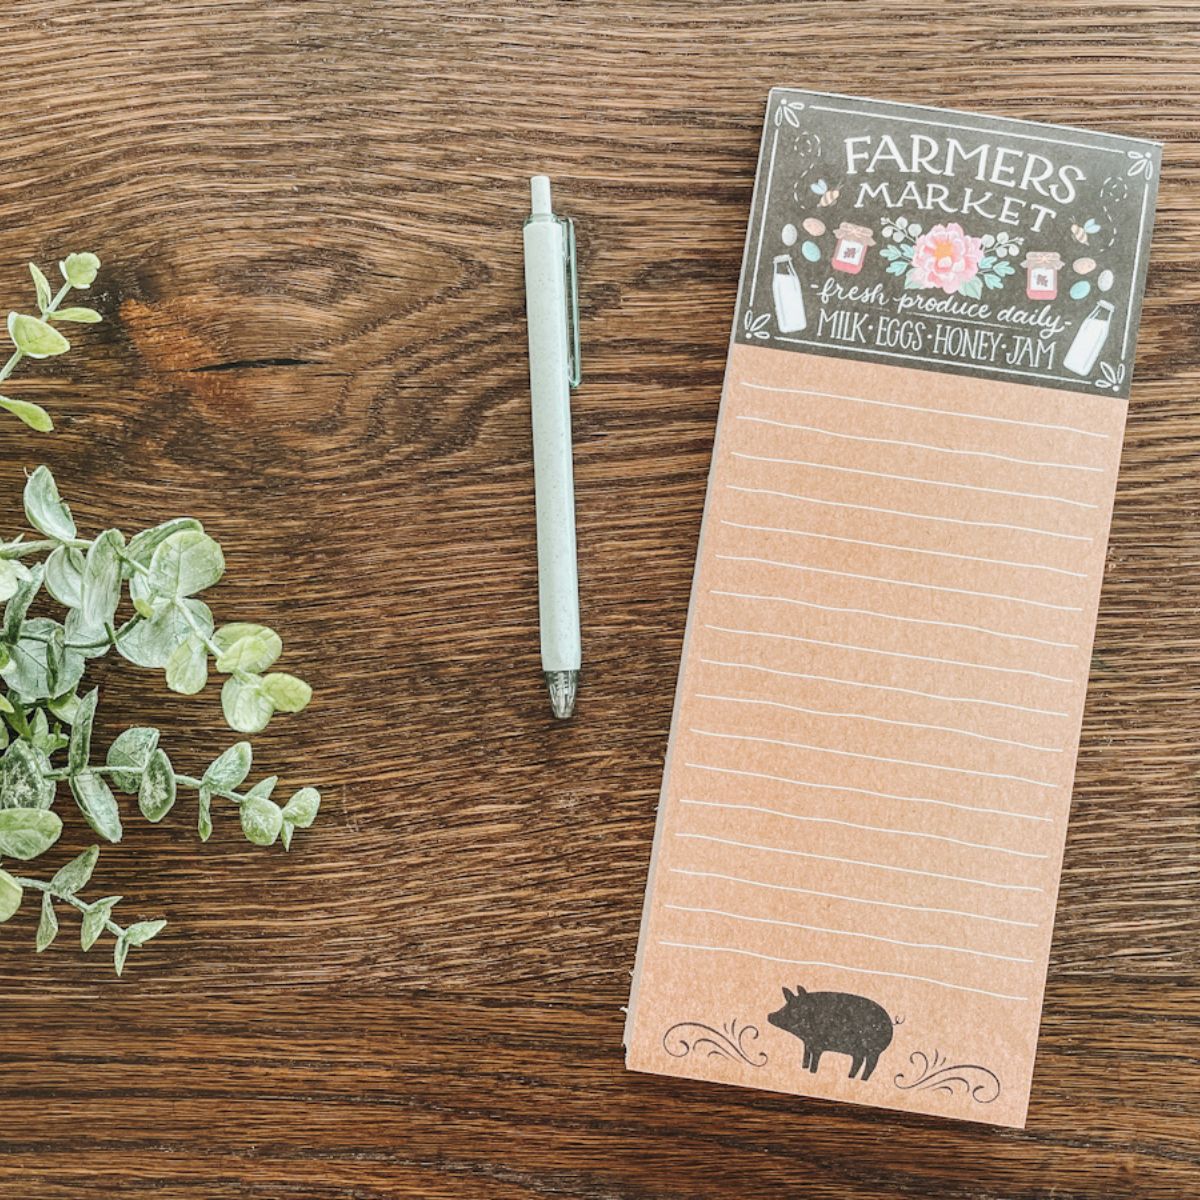 grocery paper laying on wood tabletop next to pen to create a meal plan